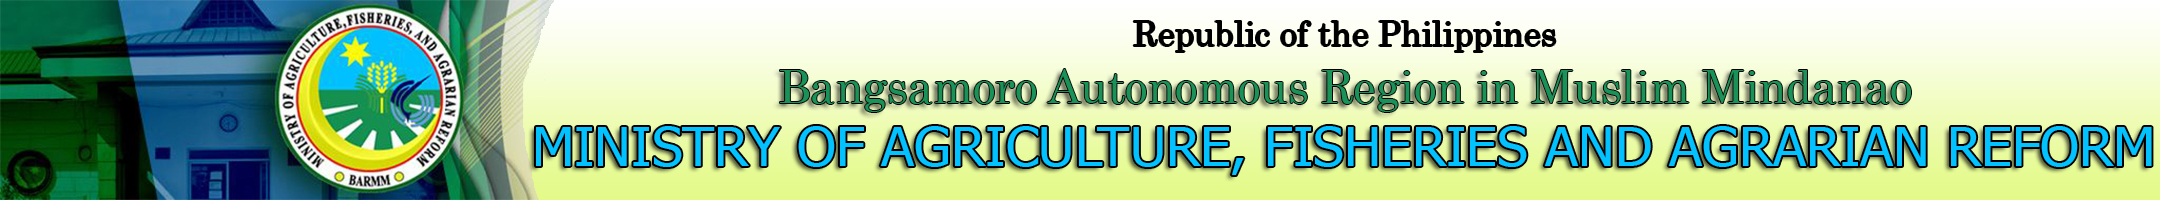 Ministry of Agriculture, Fisheries and Agrarian Reform